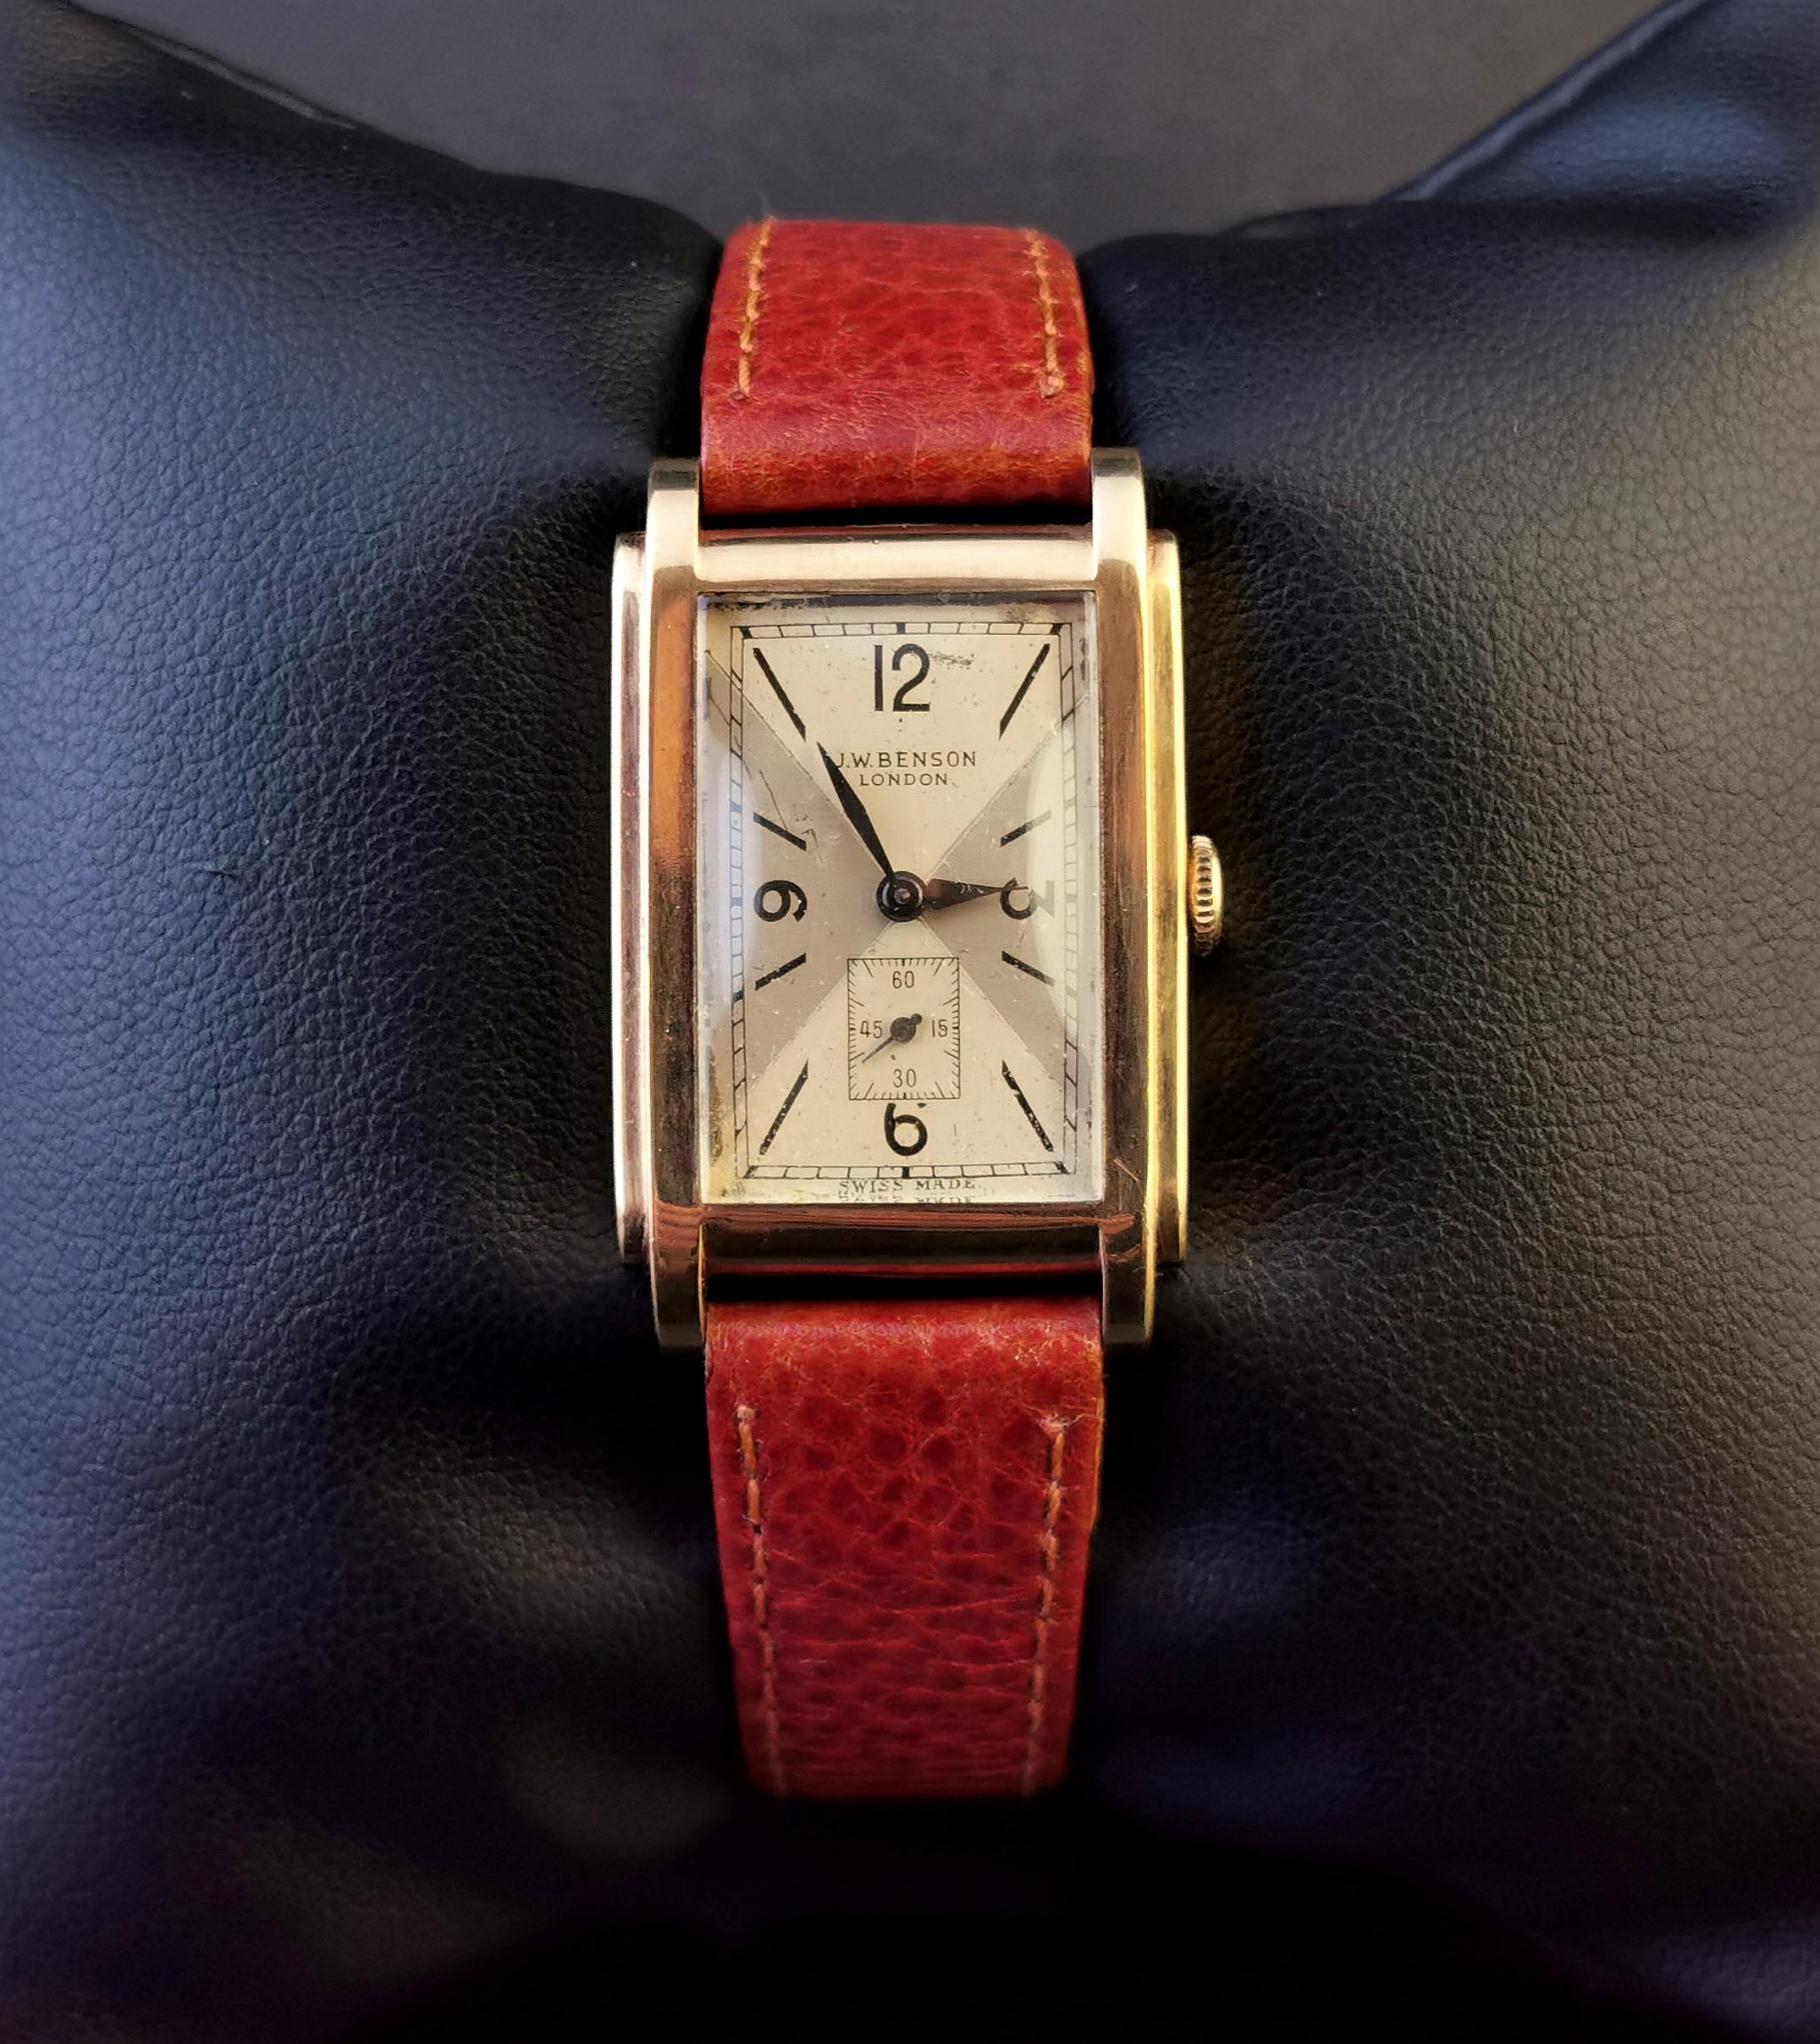 A handsome vintage 9kt yellow gold Gents wristwatch.

Made by the renowned JW Benson, movement marked JW Benson England and Swiss make. 

It has a rectangular yellow gold case with a champagne enamel dial with black Arabic numerals and hands and a